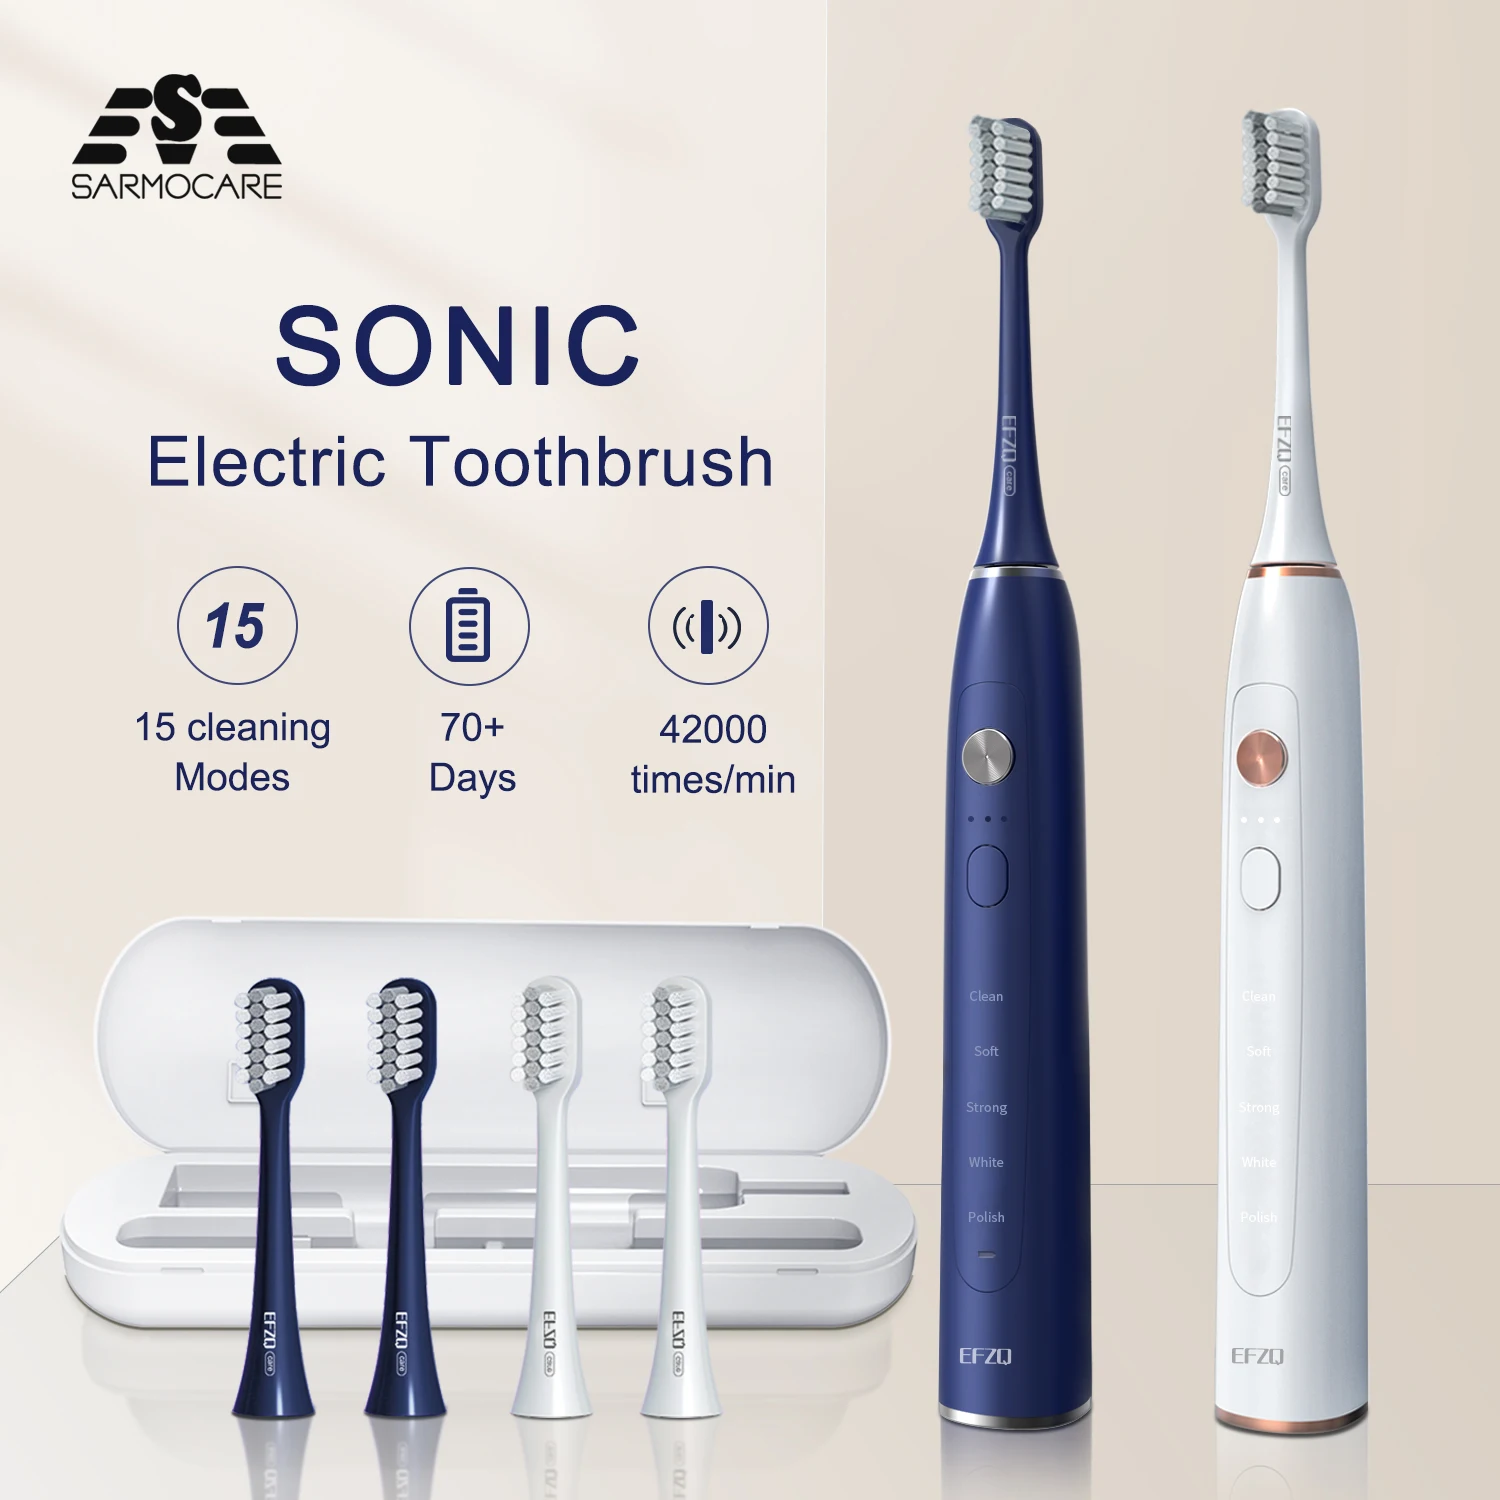 Sonic Electric Toothbrush Tooth Brush USB Electr Toothbrush Adult Ultrasonic Brush For Teeth Cleaning Fast Shipping With Case